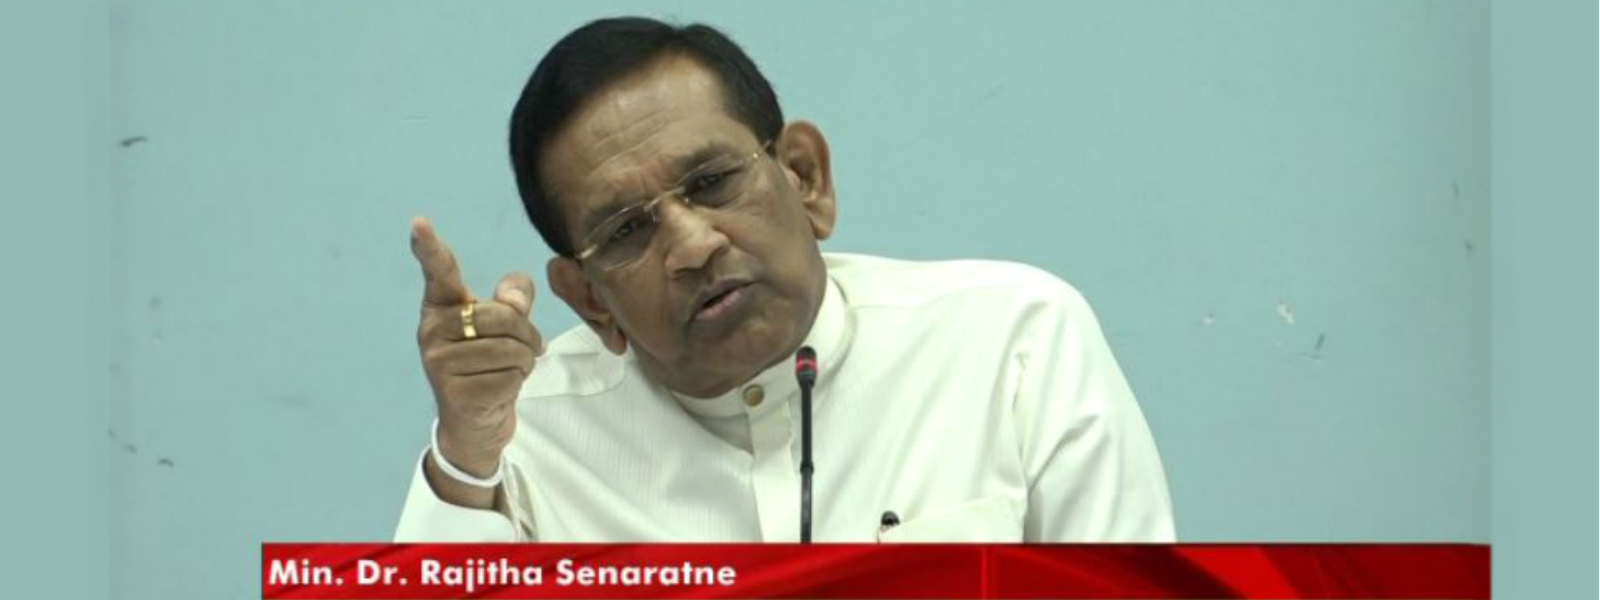 Health condition prevents the arrest of Rajitha